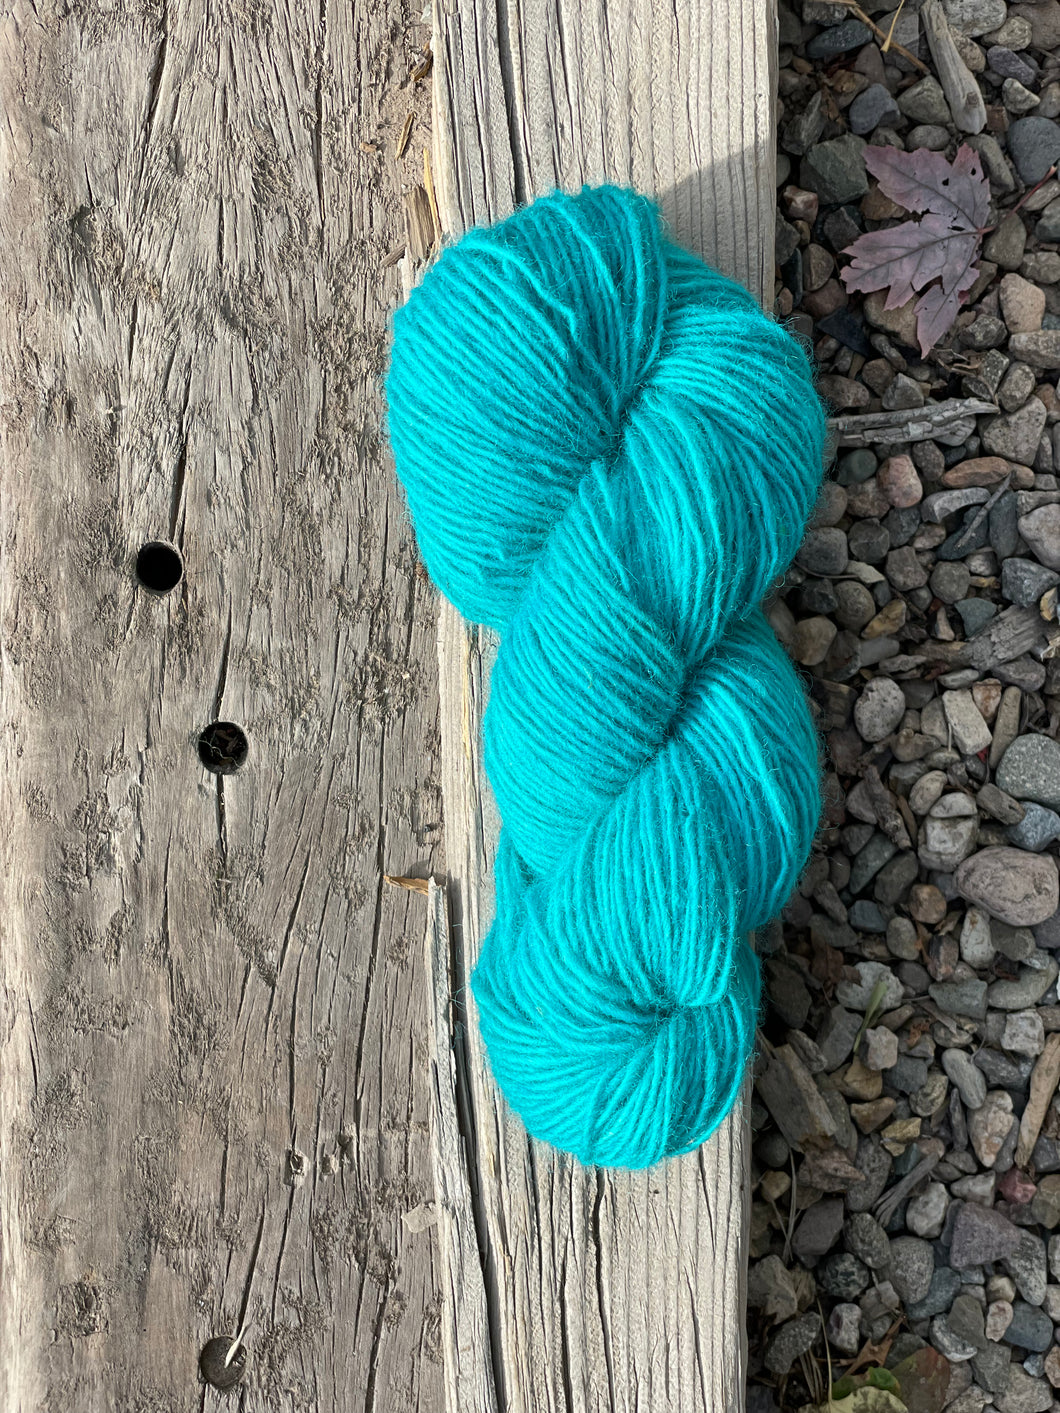 Tapestry Weight-Turquoise B-Gradation Series